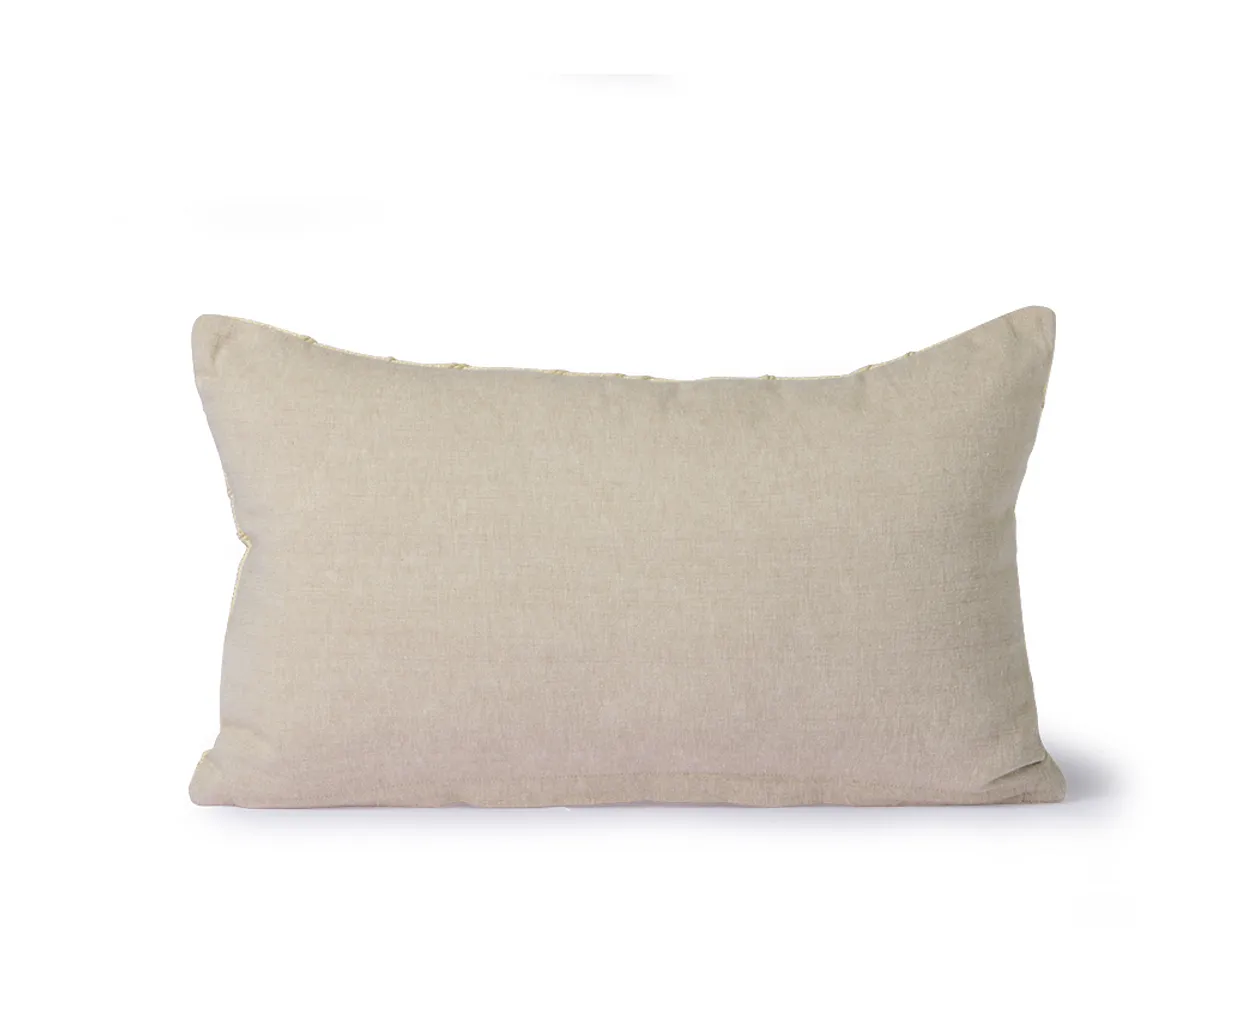 Cream cushion with stitched lines (30x50)